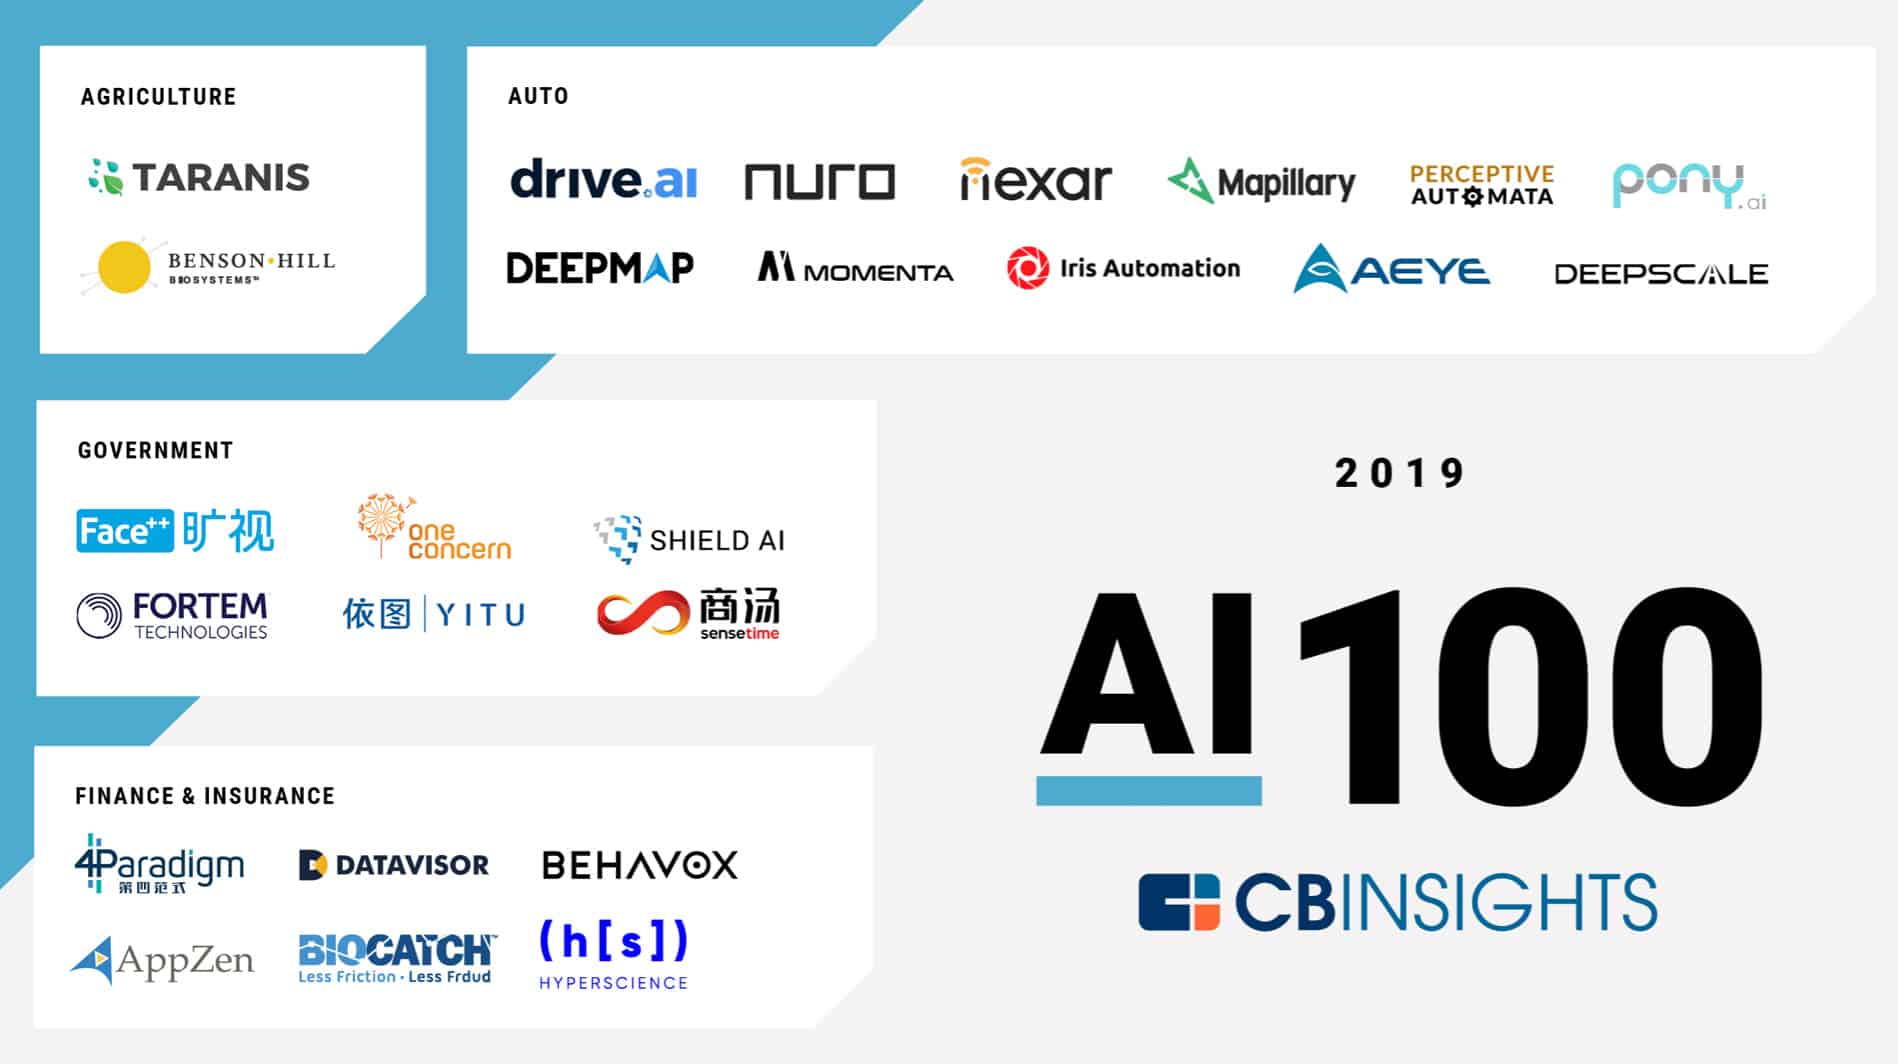 Fortem Included in CB Insights 3rd Annual Top 100 AI Companies